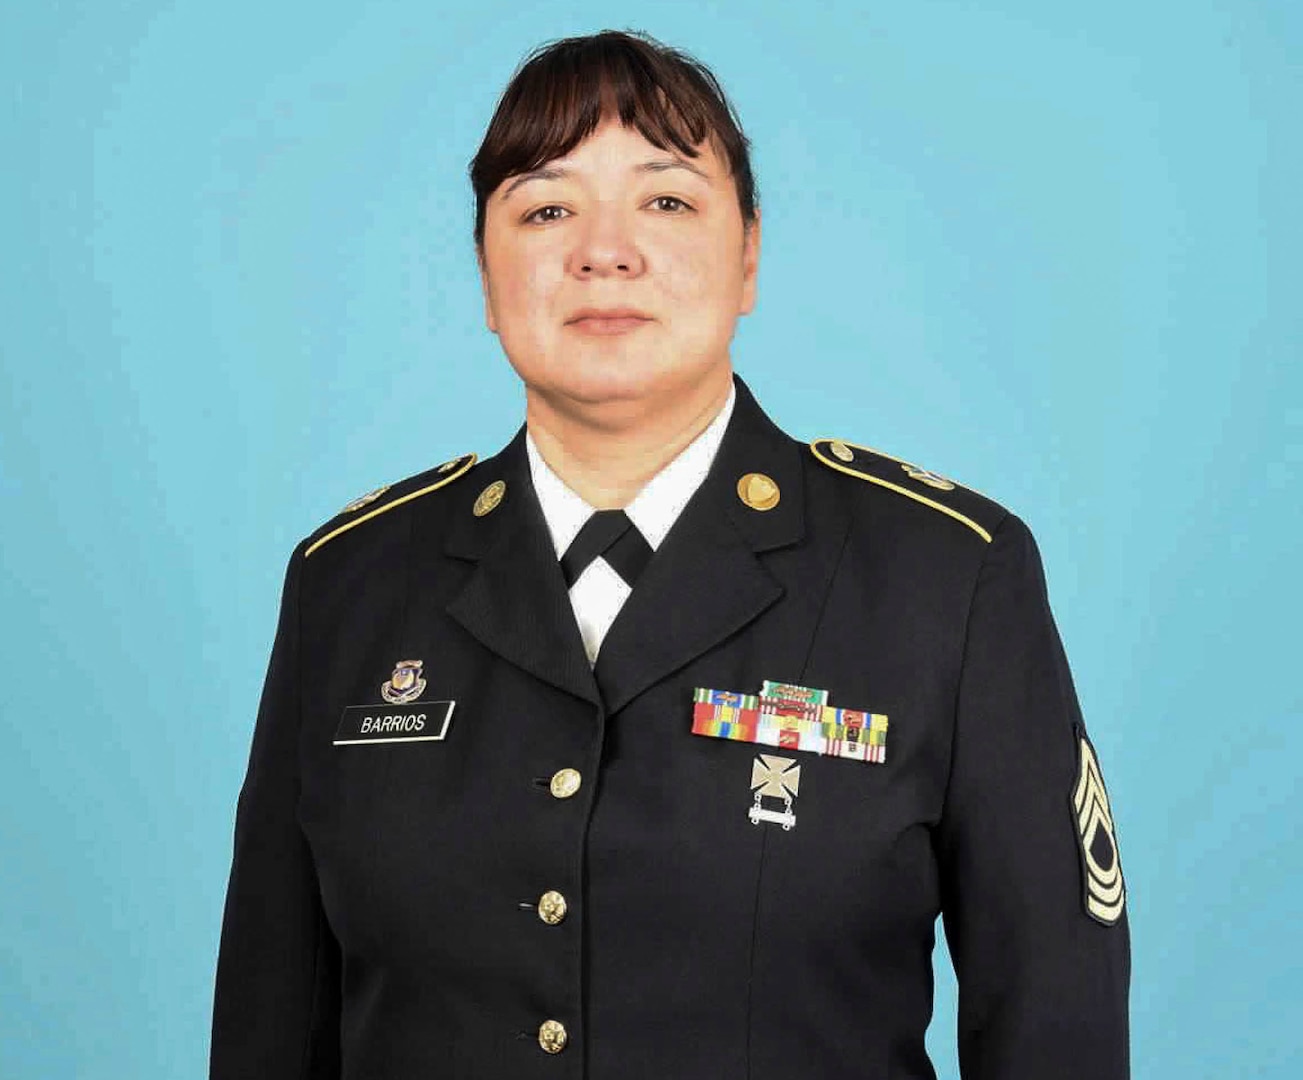 Master Sgt. Thelma Barrios, brigade senior human resource noncommissioned officer for the 108th Sustainment Brigade, Illinois Army National Guard, is one of only 21 service members selected as a national 2022 Latina Style Distinguished Military Service Award recipient.